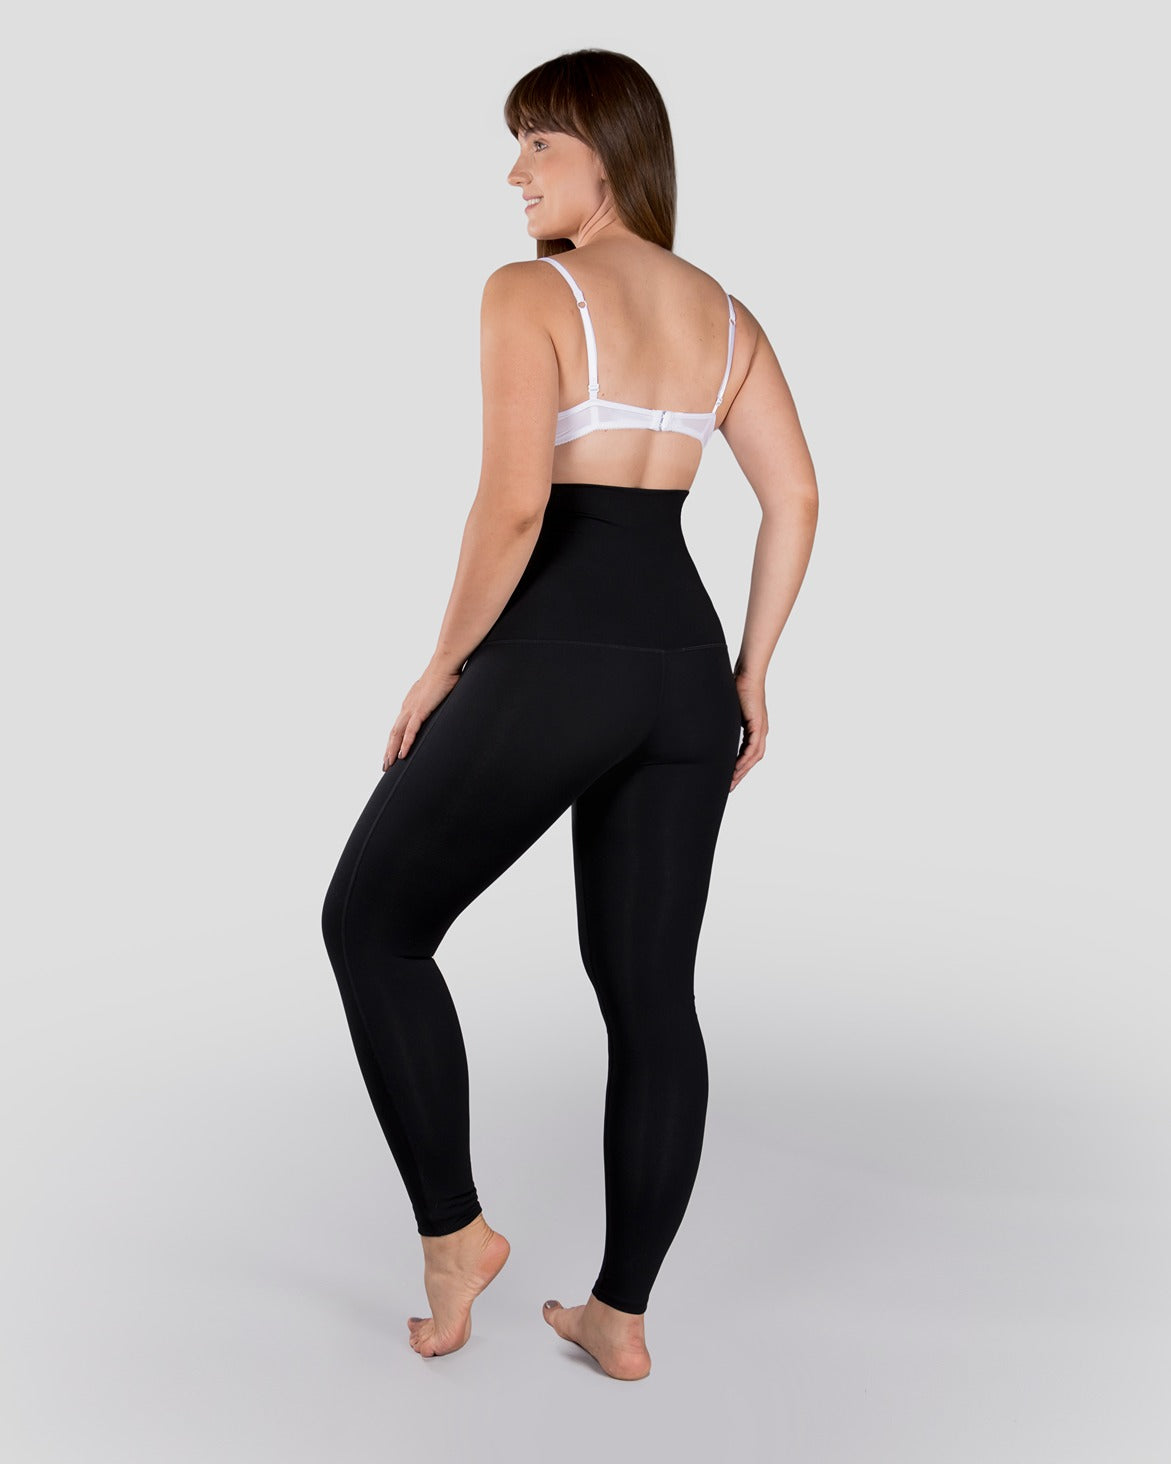 Extra High Waisted Firm Compression Legging